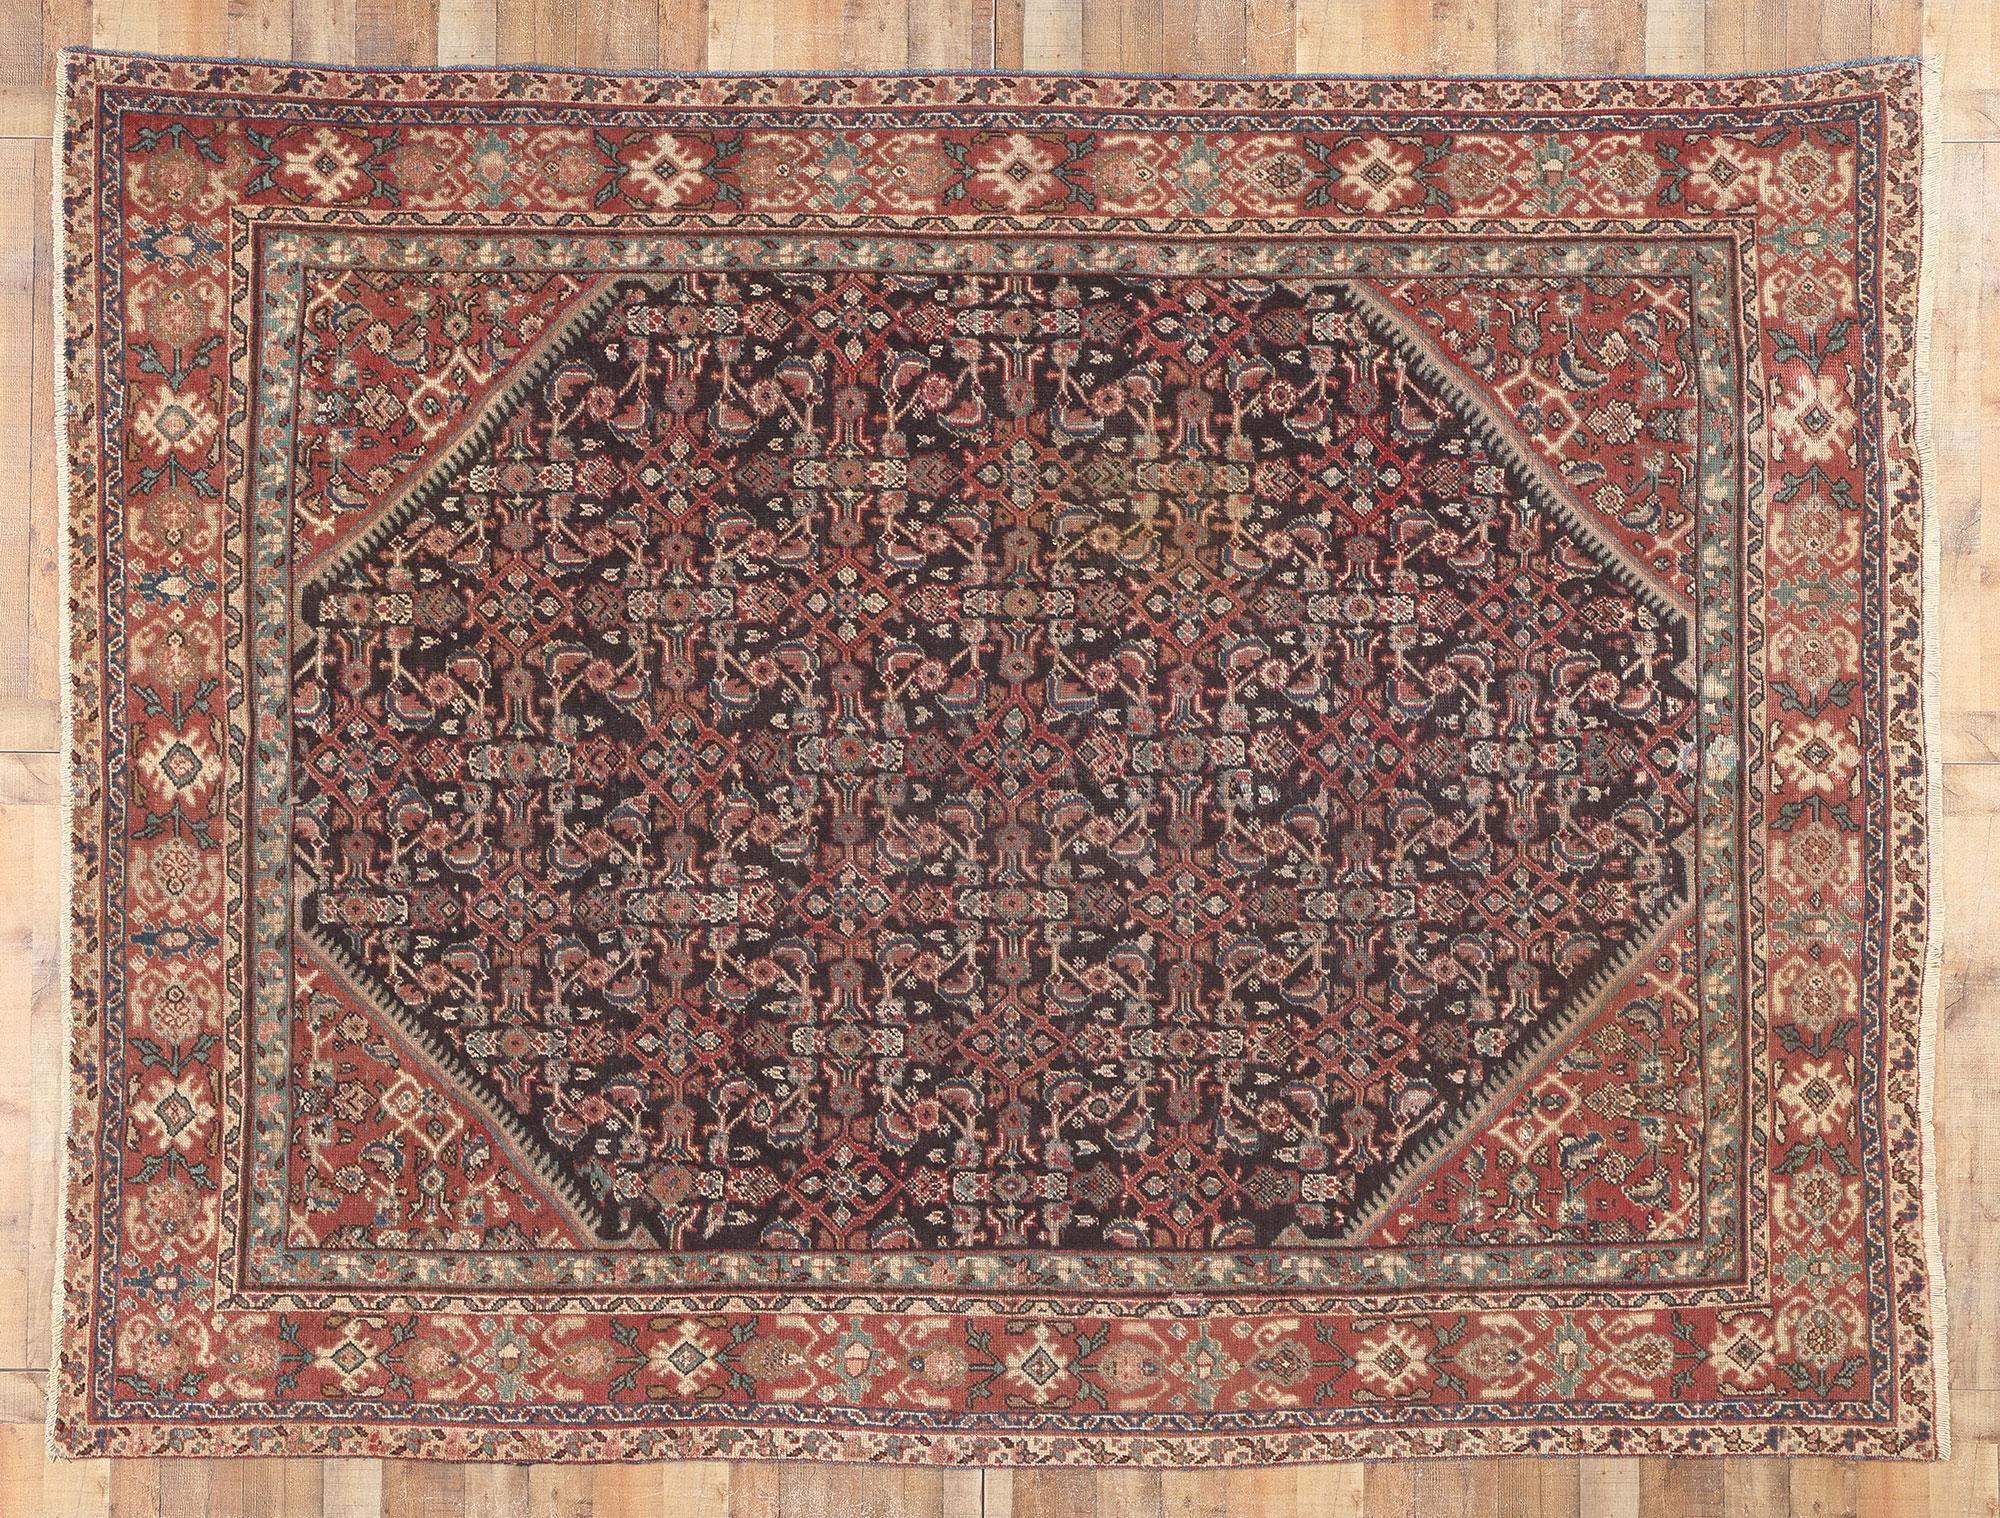 Wool Antique-Worn Persian Mahal Rug, Traditional Sensibility Meets Rustic Charm For Sale